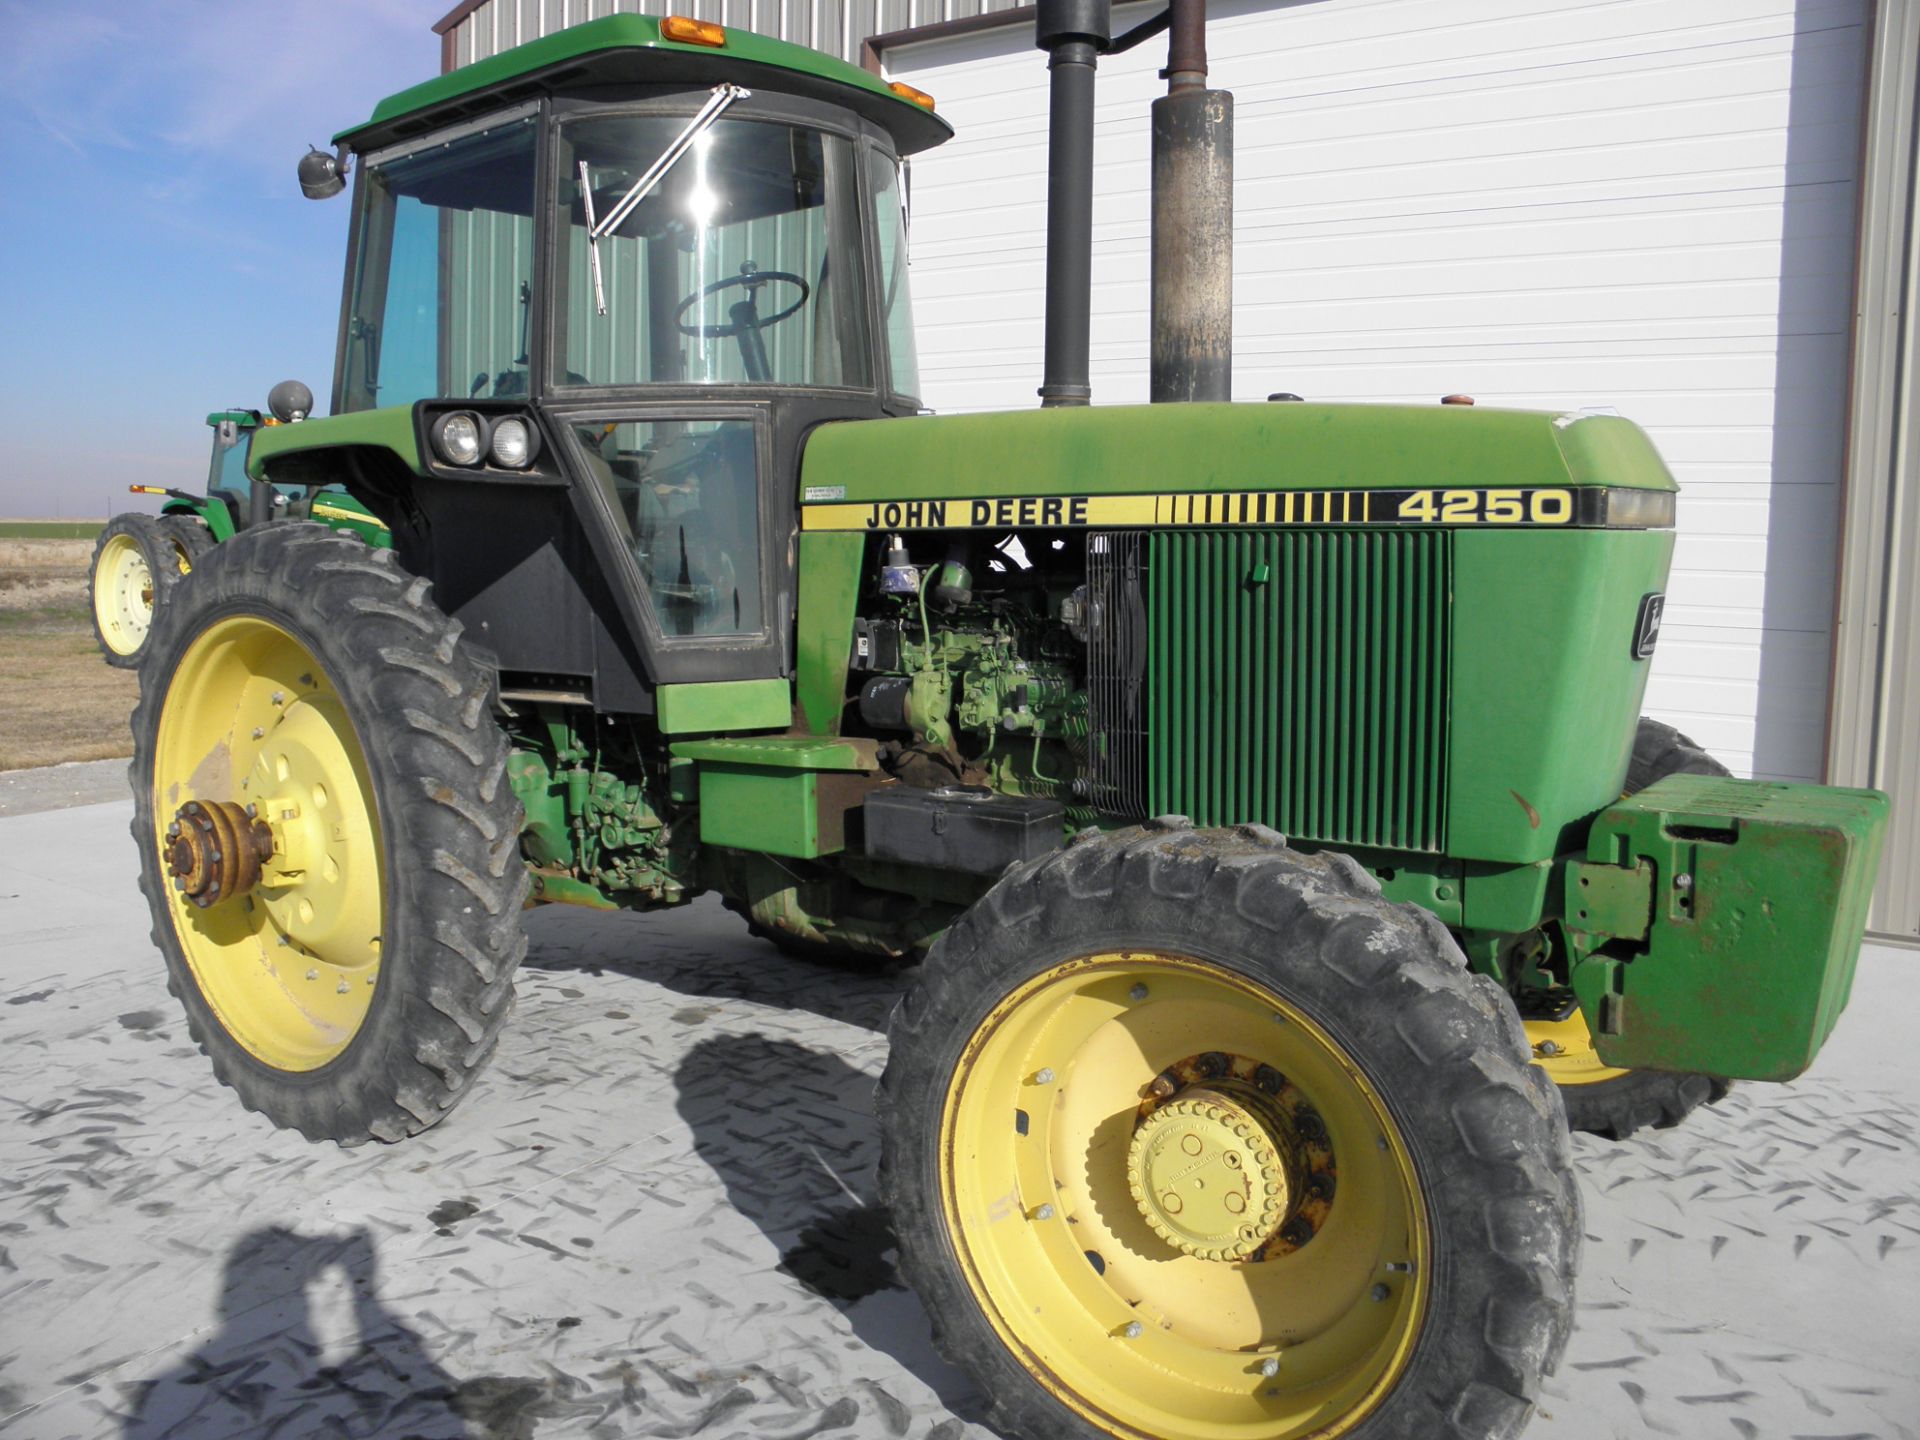 JD 4250 MFWD powershift trans, 3 hyd remotes, 12.4 X 46 rubber, 7585 hrs